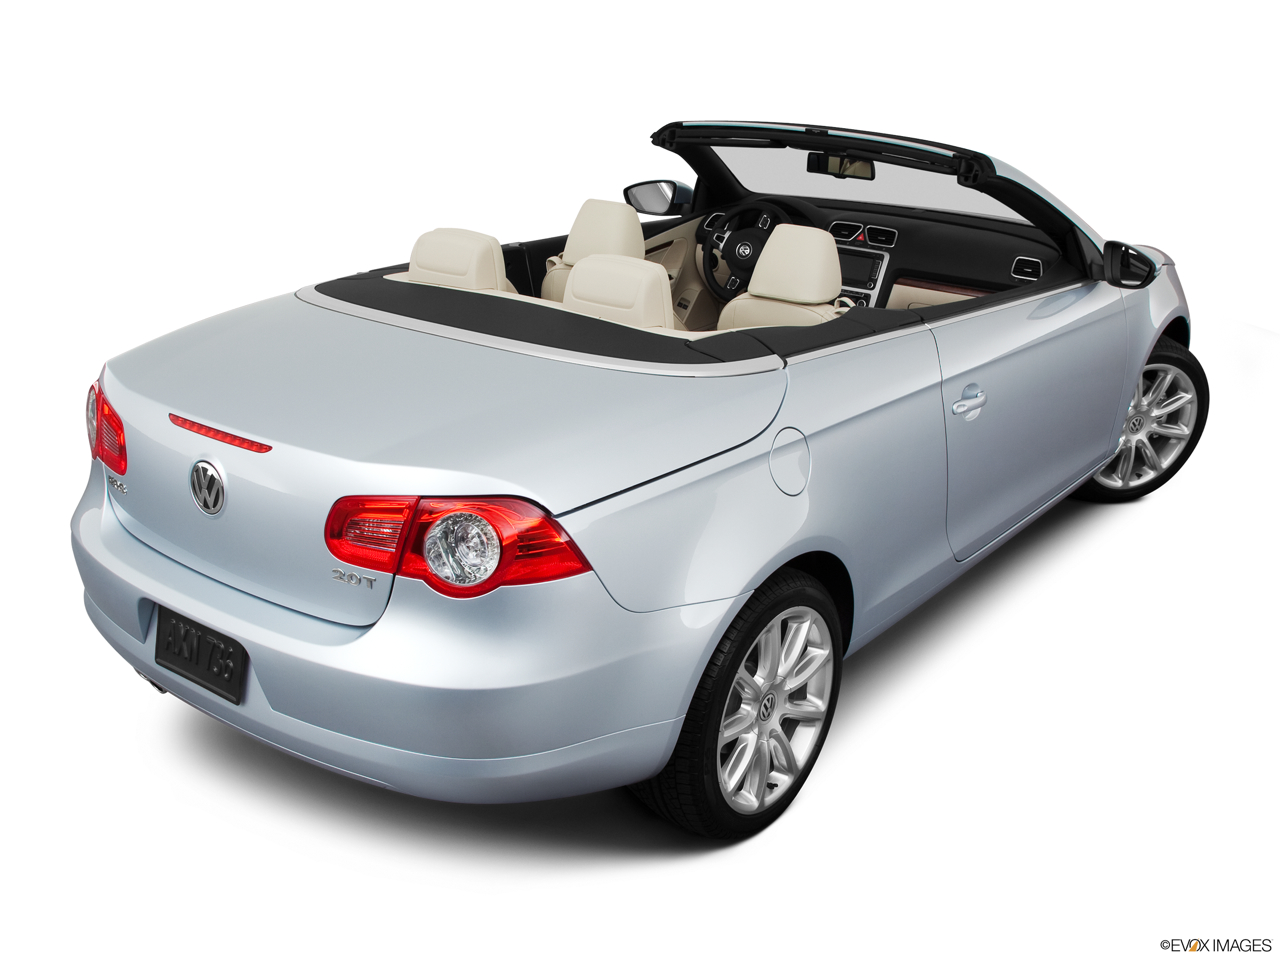 2011 Volkswagen Eos Lux Rear 3/4 angle view. 